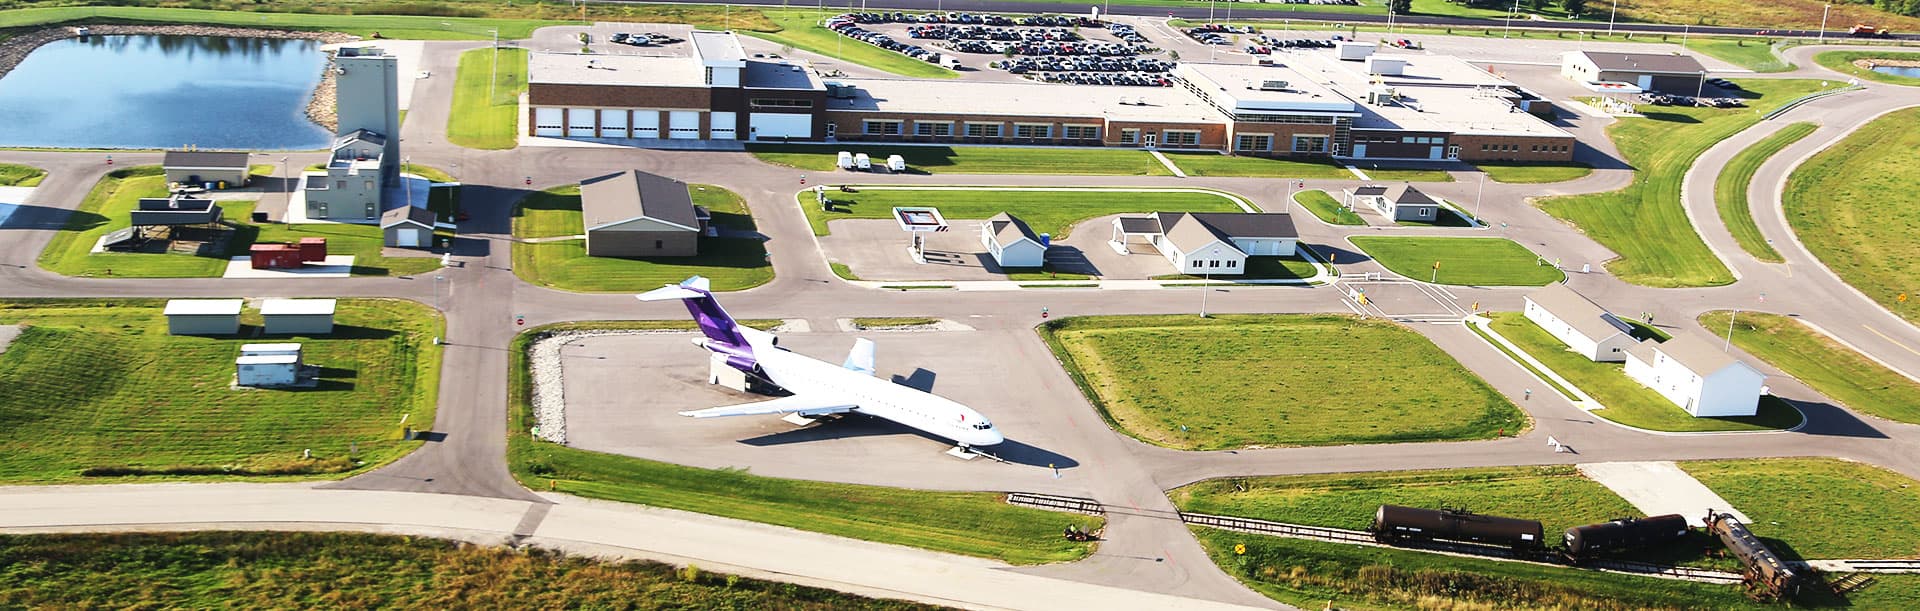 aerial view of Fox Valley Technical College Public Safety Training Center grounds with multiple buildings and airplane